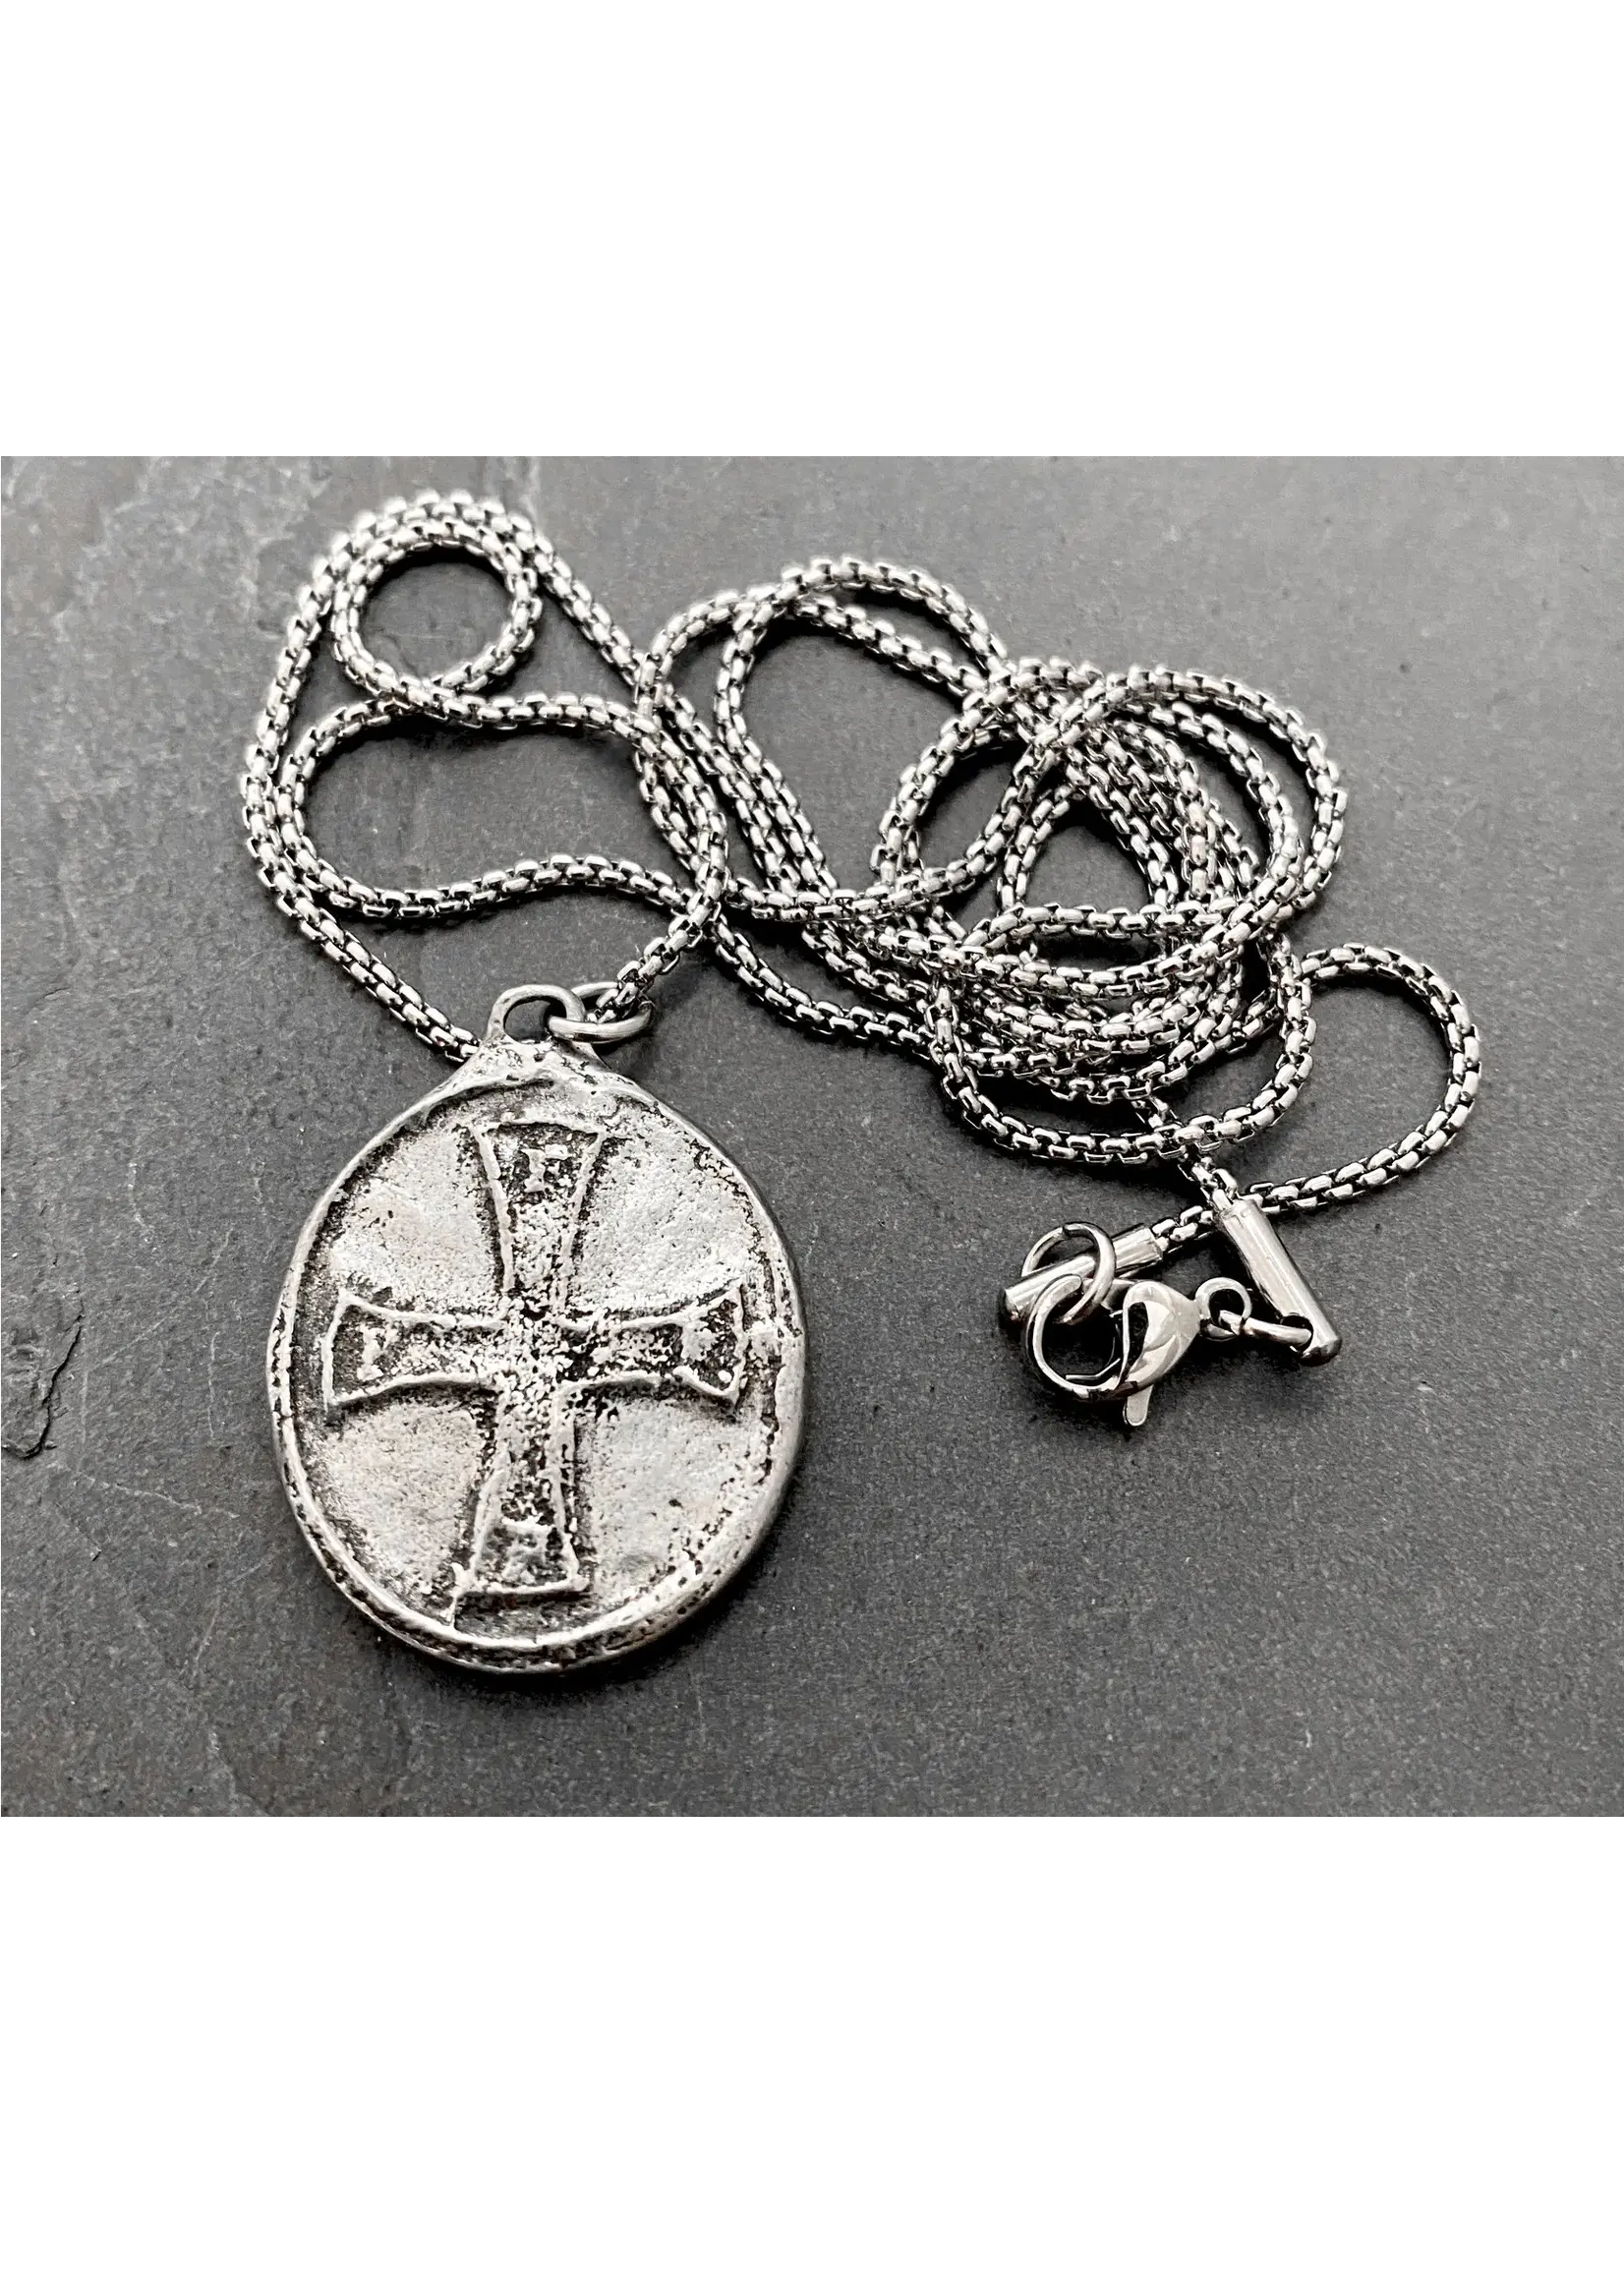 johnny ltd Archangel and Cross Medal Necklace 24"